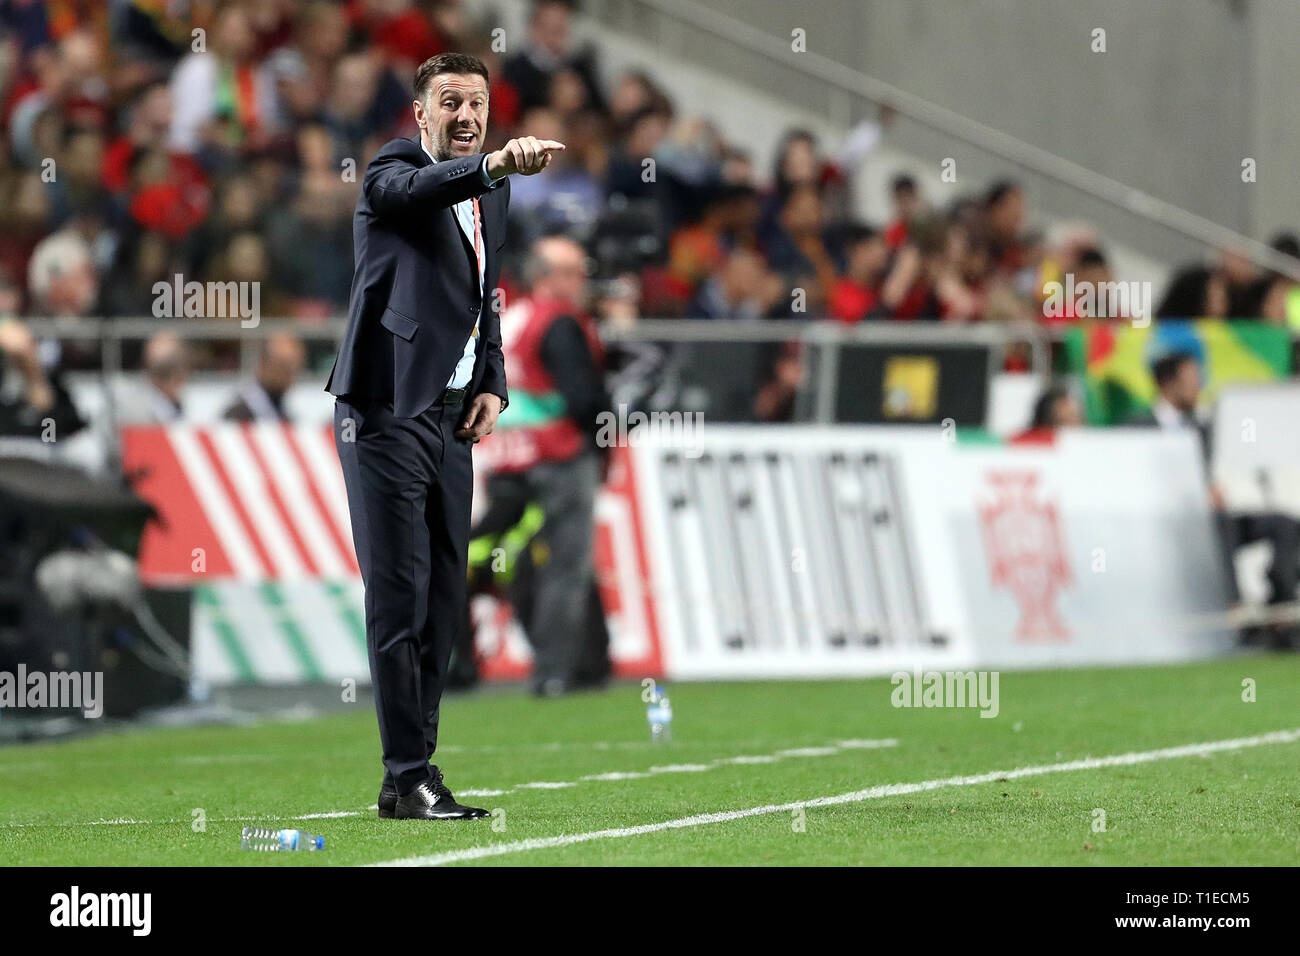 Coach Mladen Krstajic of Serbia in action during the Qualifiers - Group B to Euro 2020 football match between Portugal vs Serbia. (Final score: Portugal 1 - 1 Serbia) Stock Photo